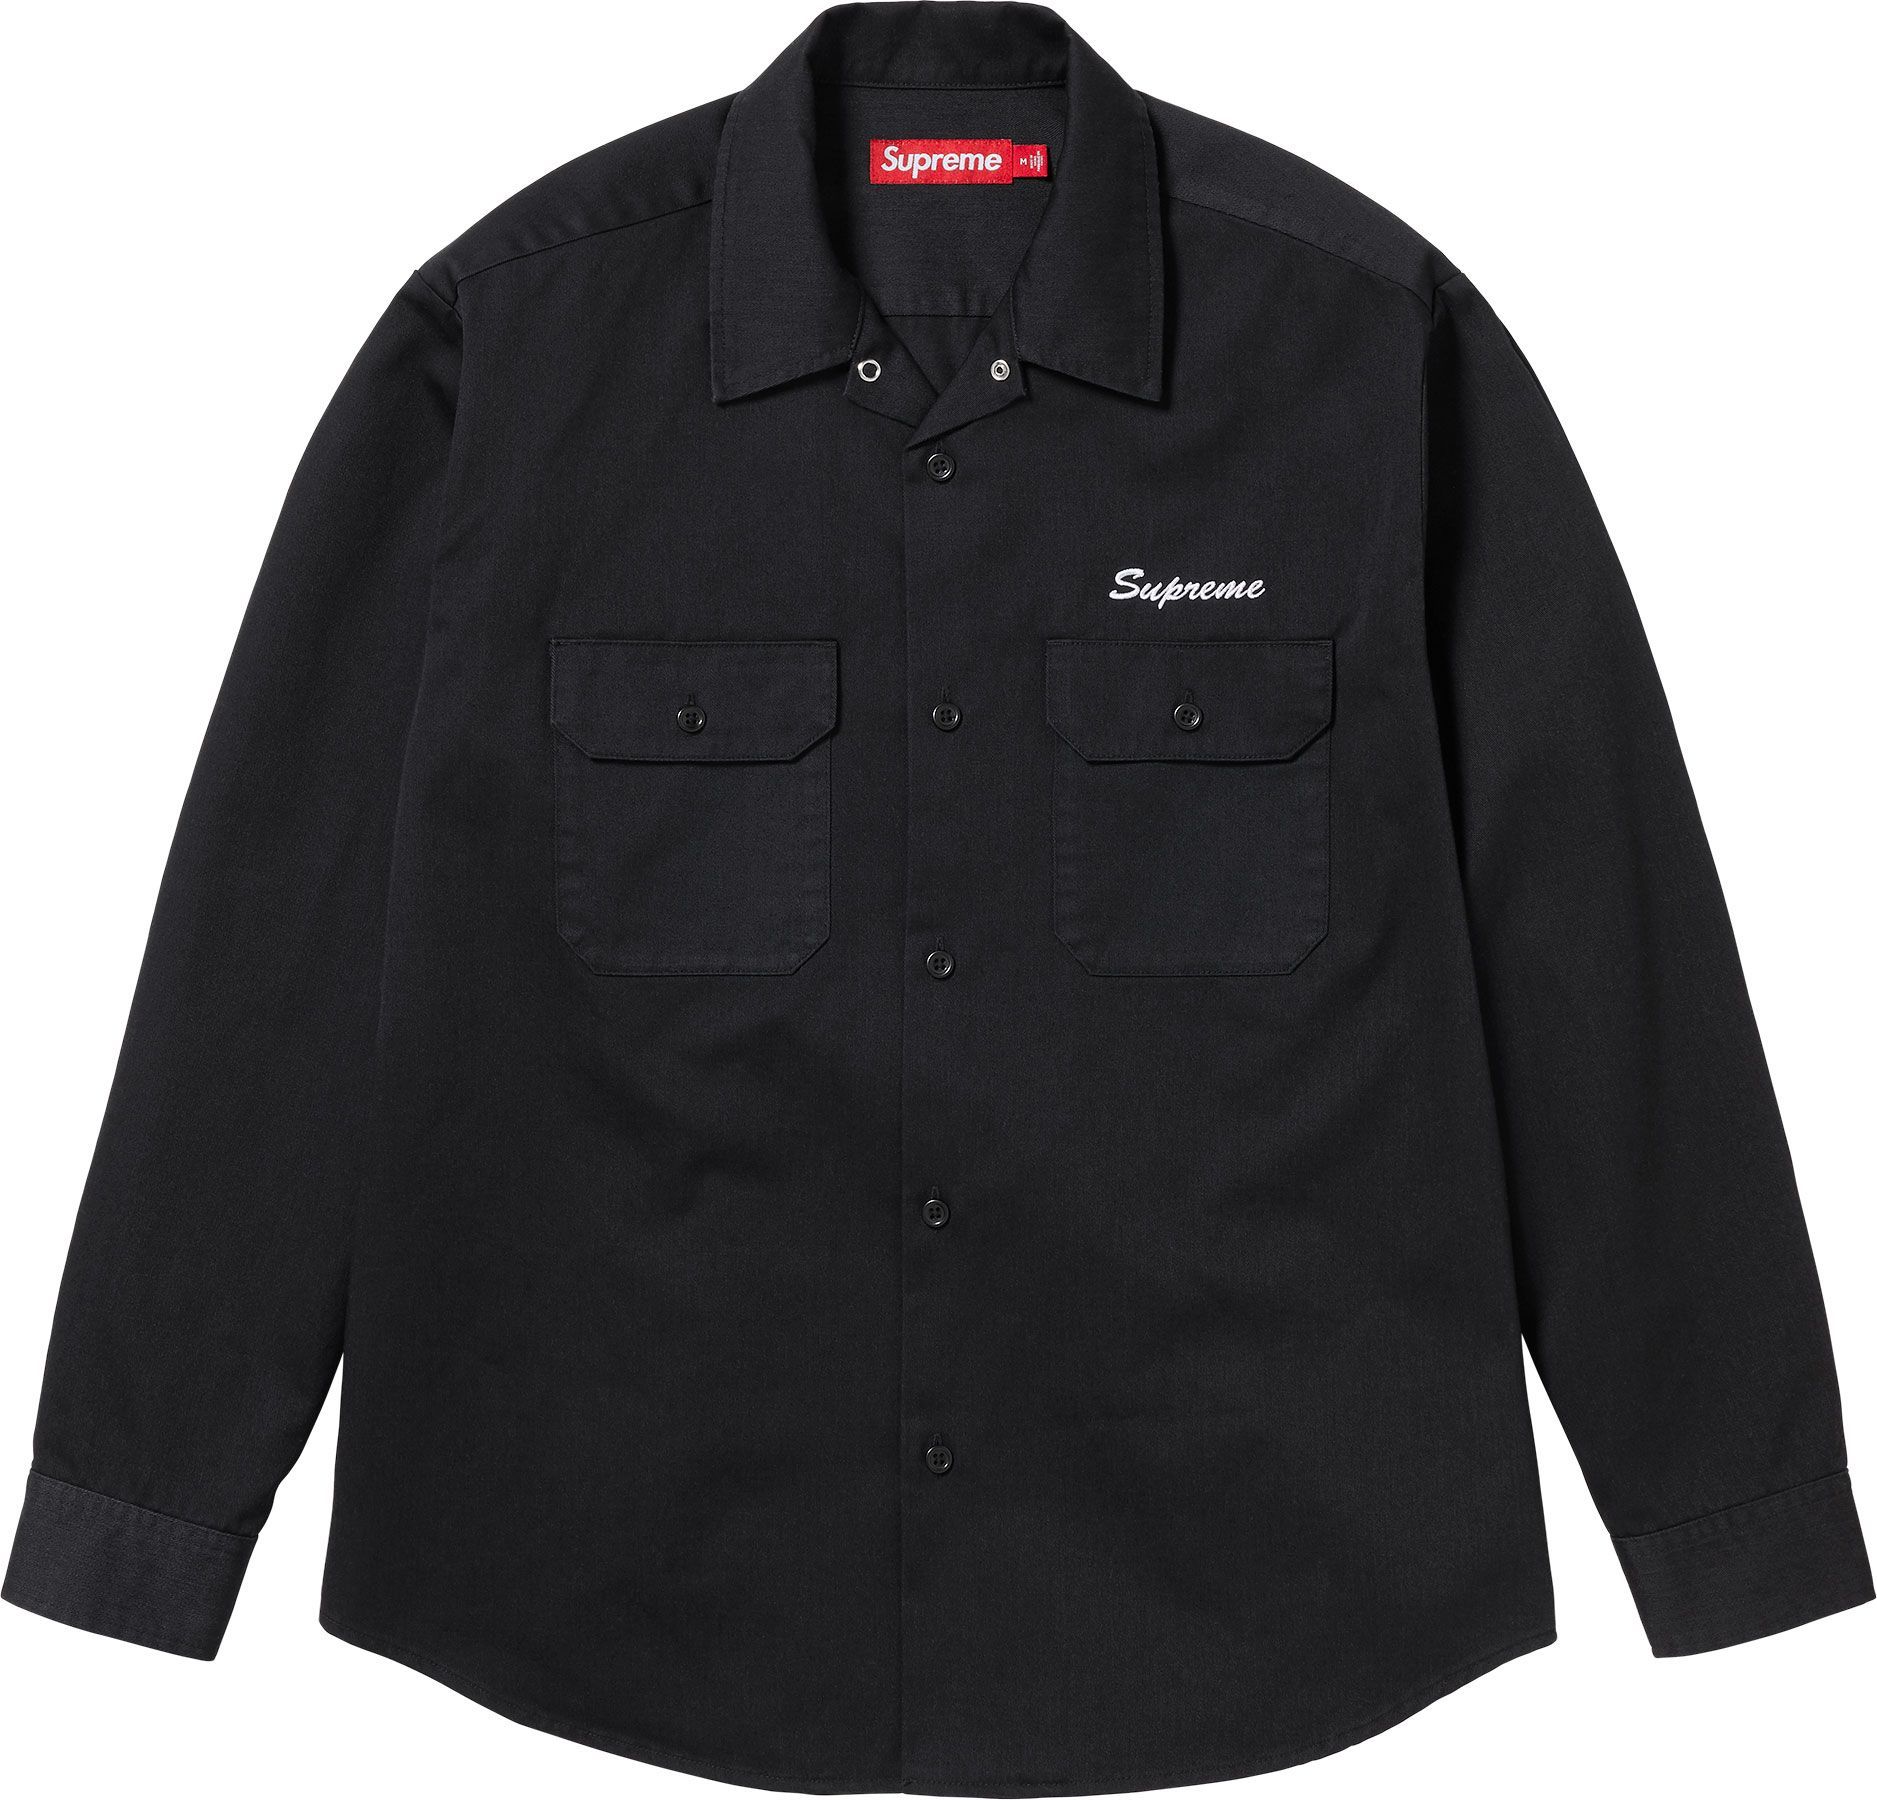 Our Lady Work Shirt – Supreme